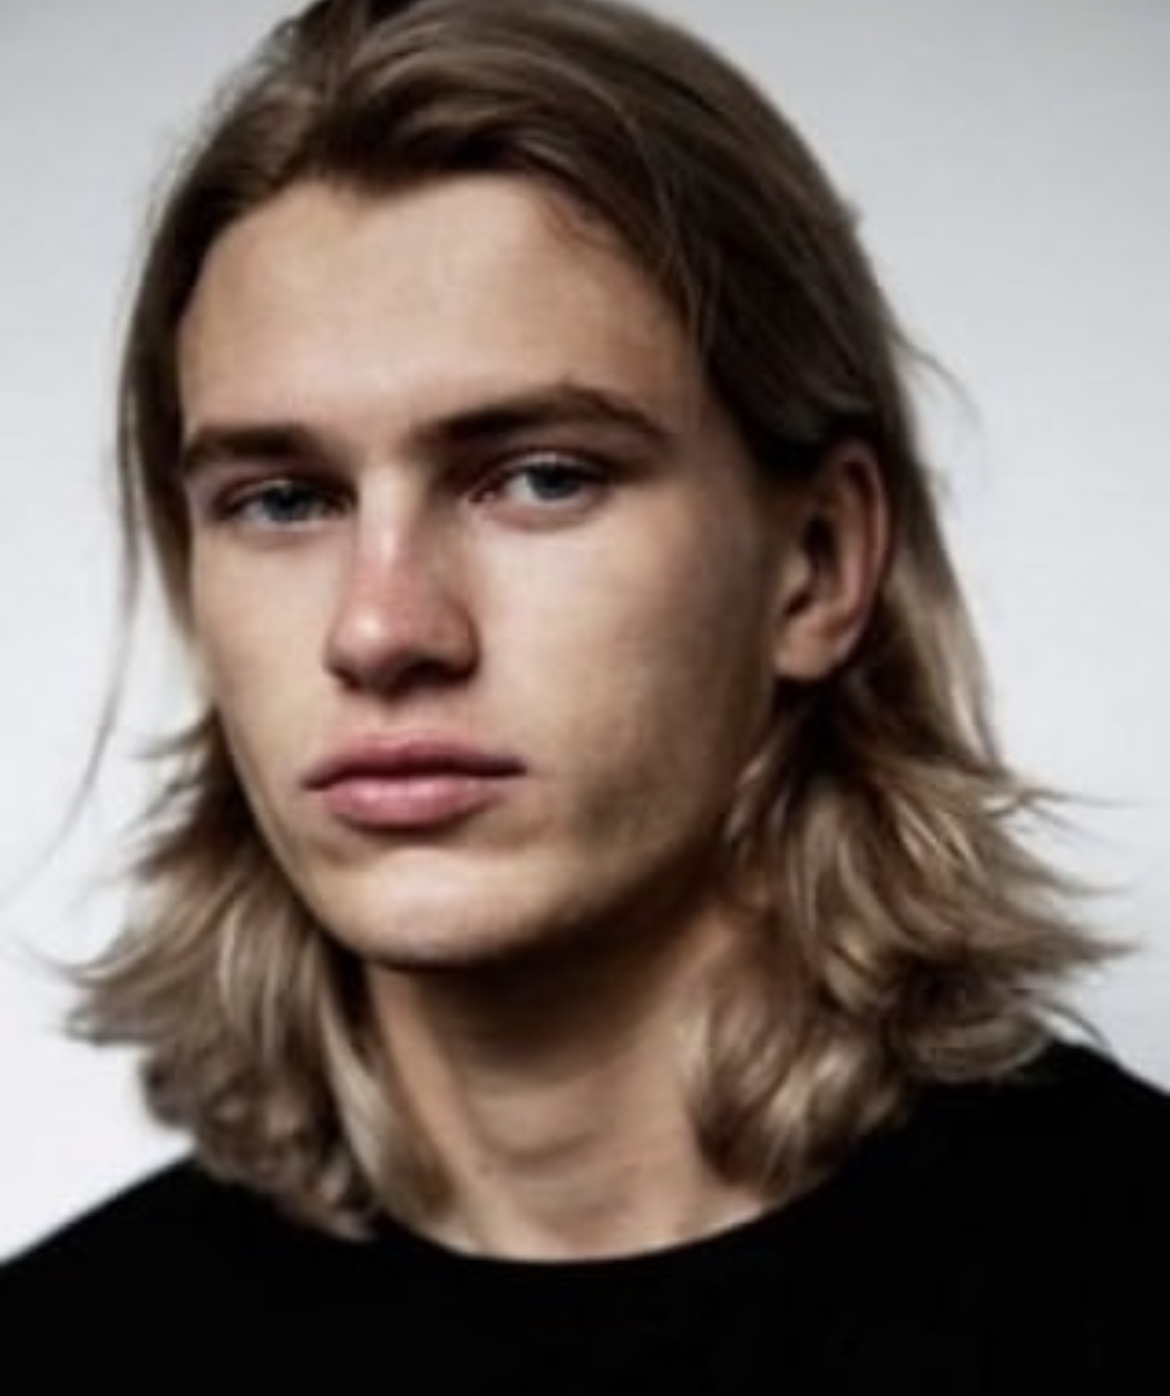 40 Of The Best Men's Long Hairstyles | FashionBeans